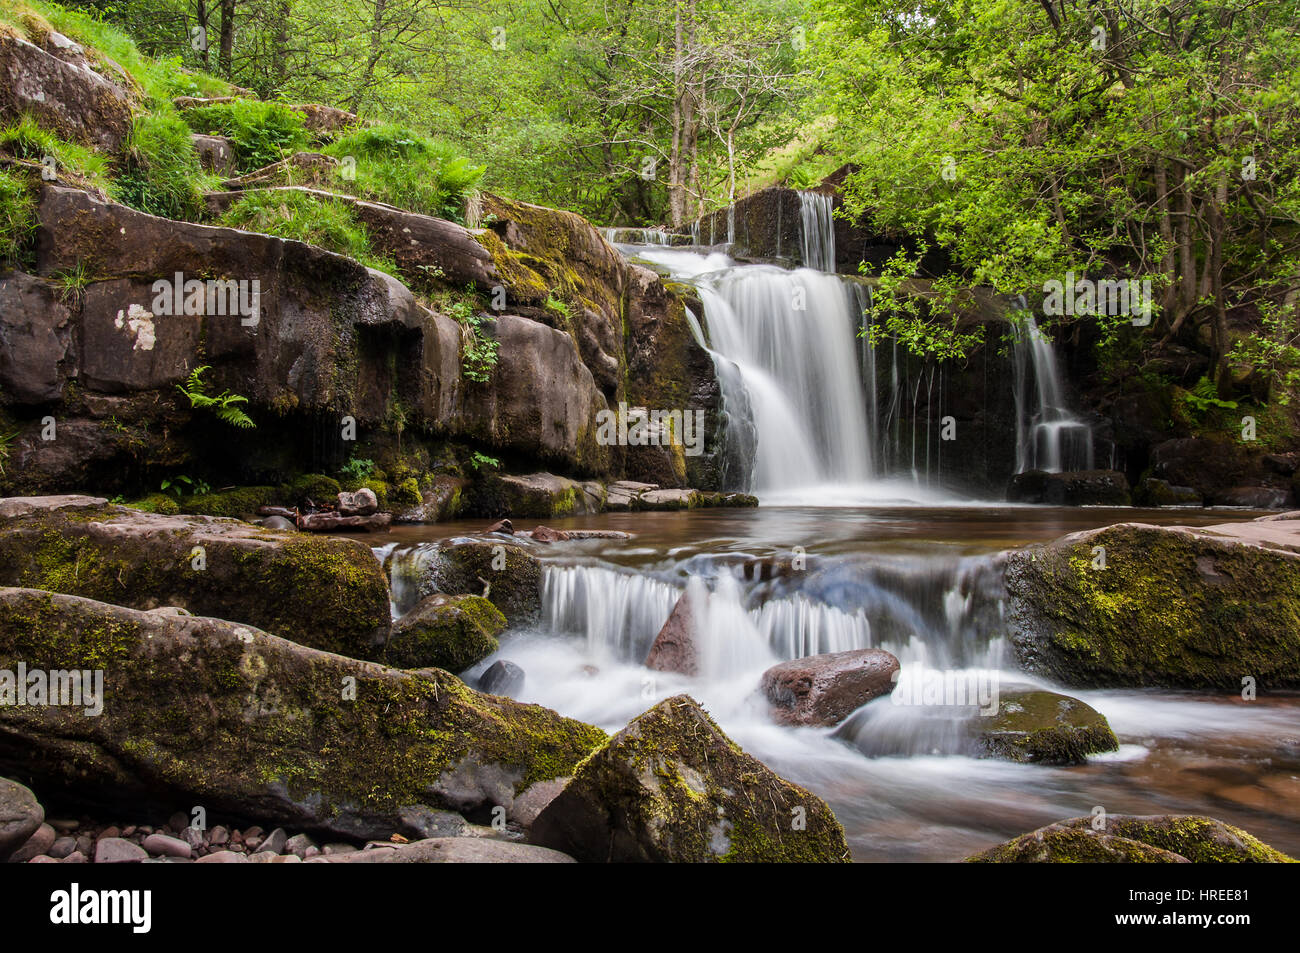 Blaen y Glyn Waterfalls above Talybont Reservoir in the Brecon Beacons National Park, Wales, UK Stock Photo